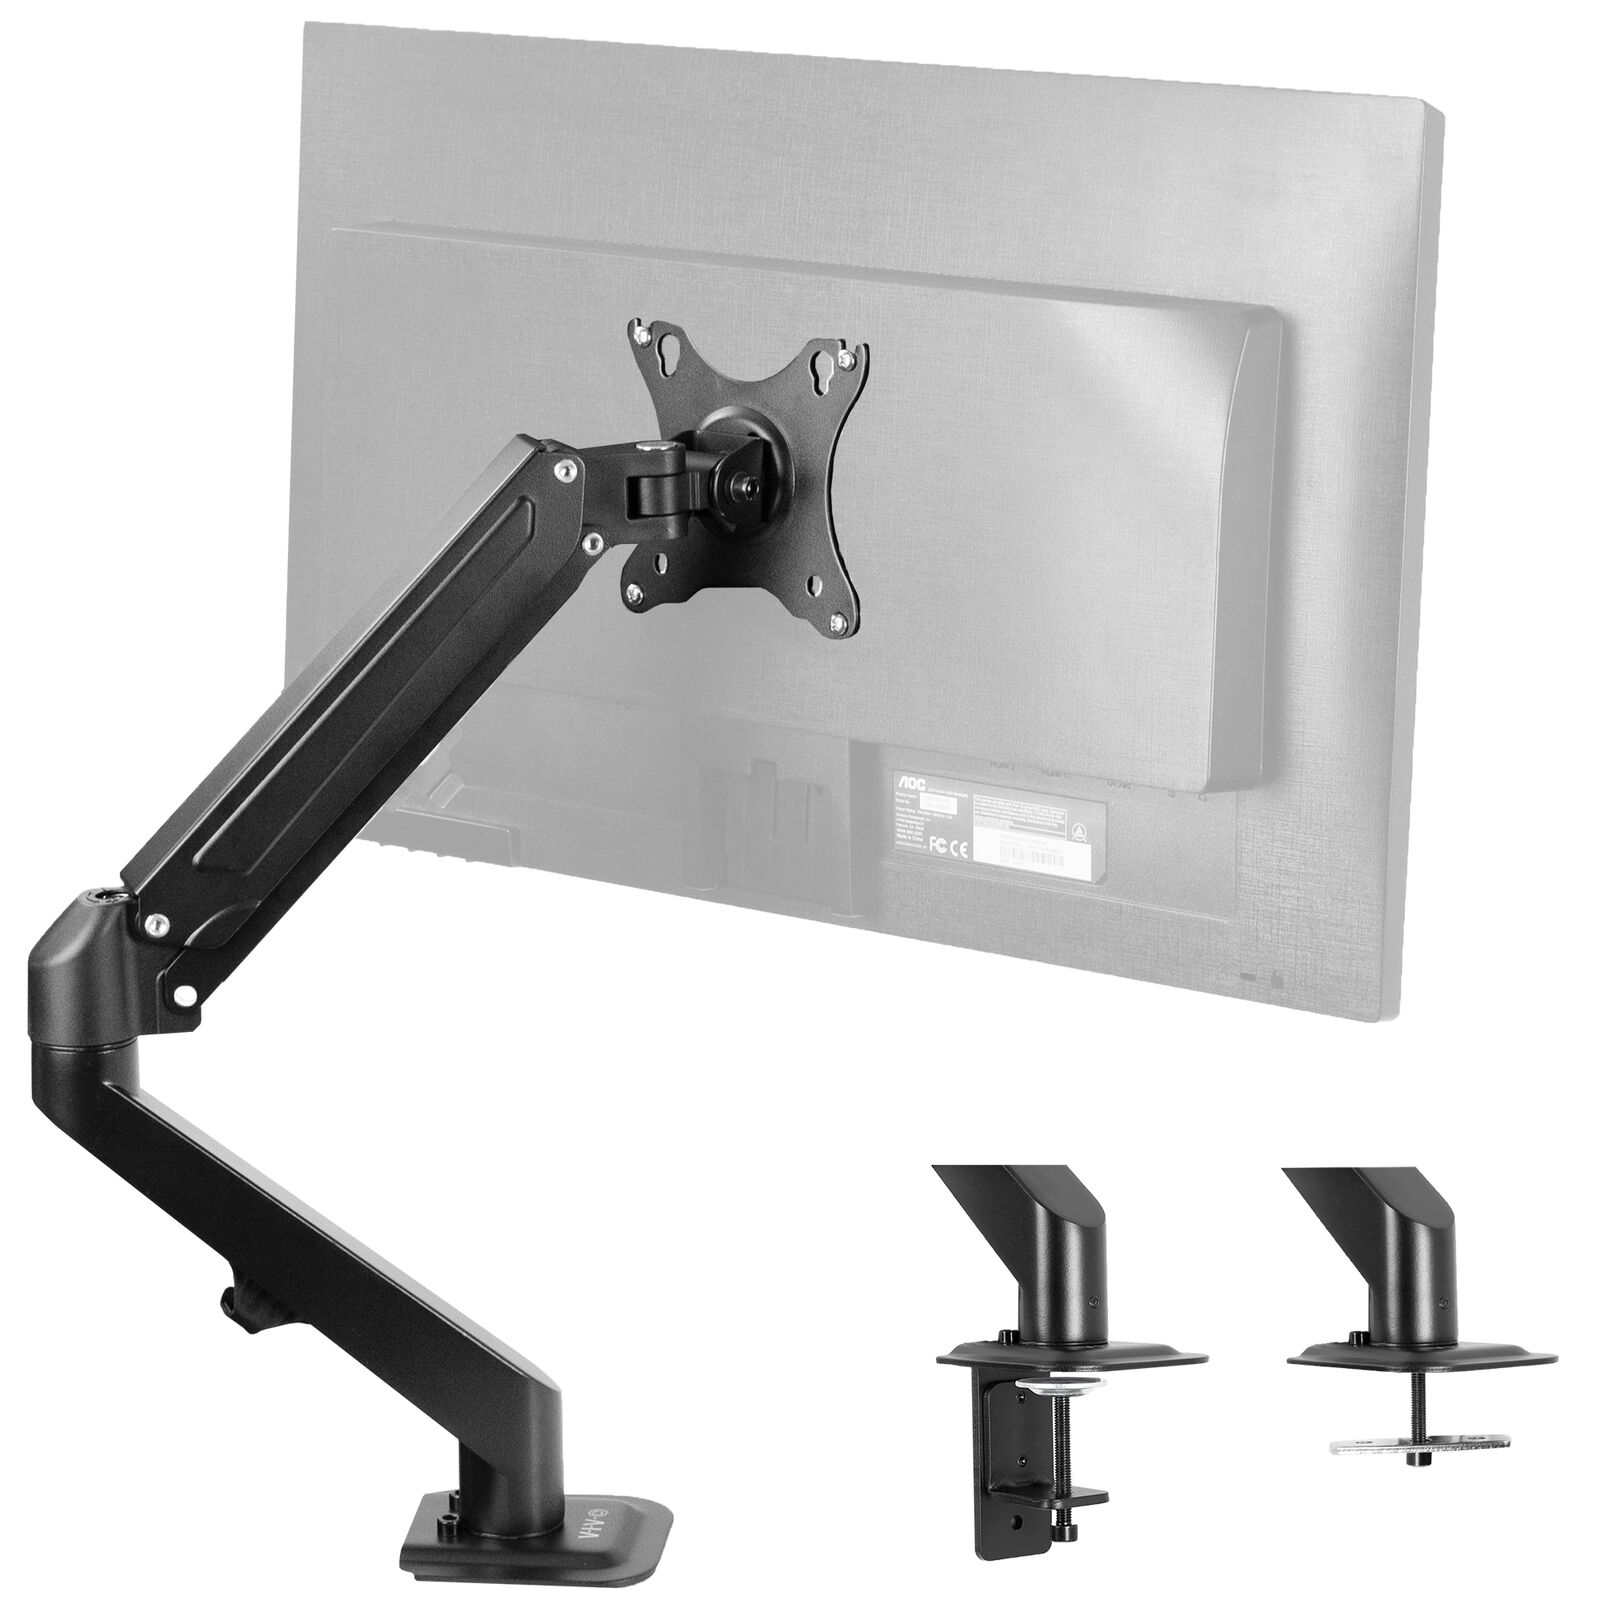 VIVO Single Monitor Counterbalance Desk Mount Stand | Fits Screens 17 Inch to 27 Inch.